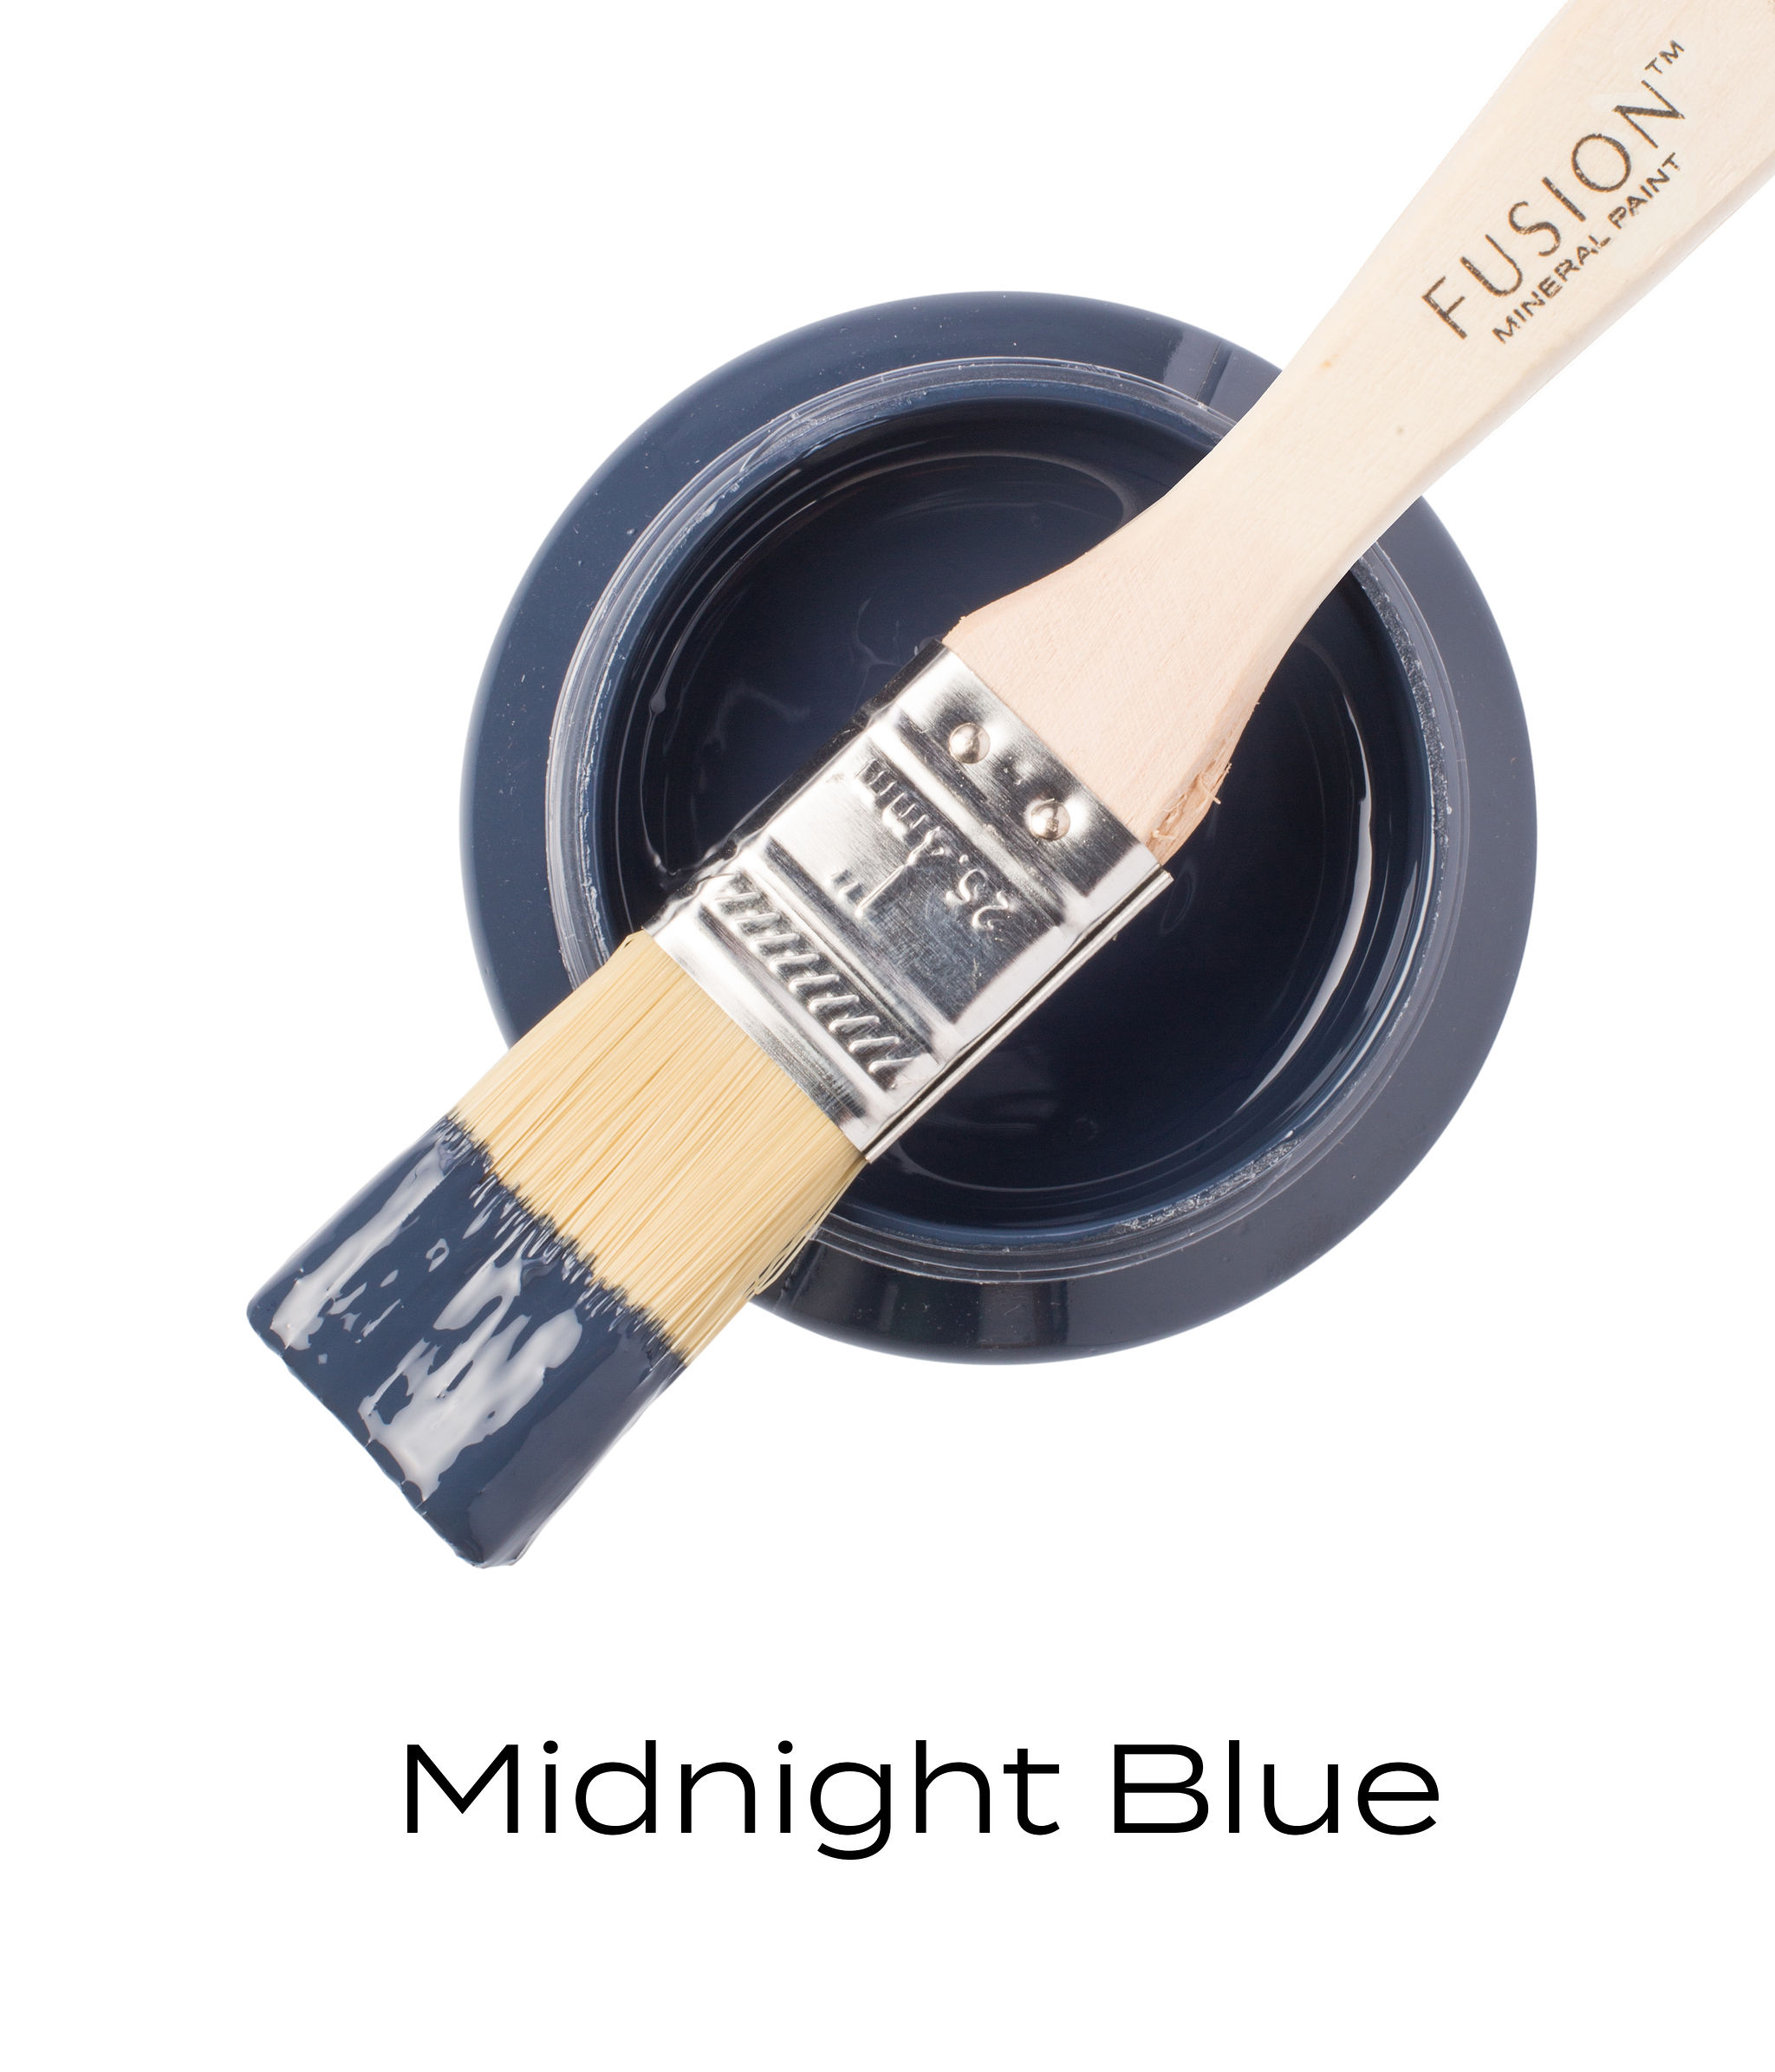 Midnight Blue Fusion Mineral Paint Goed Gestyled Brielle